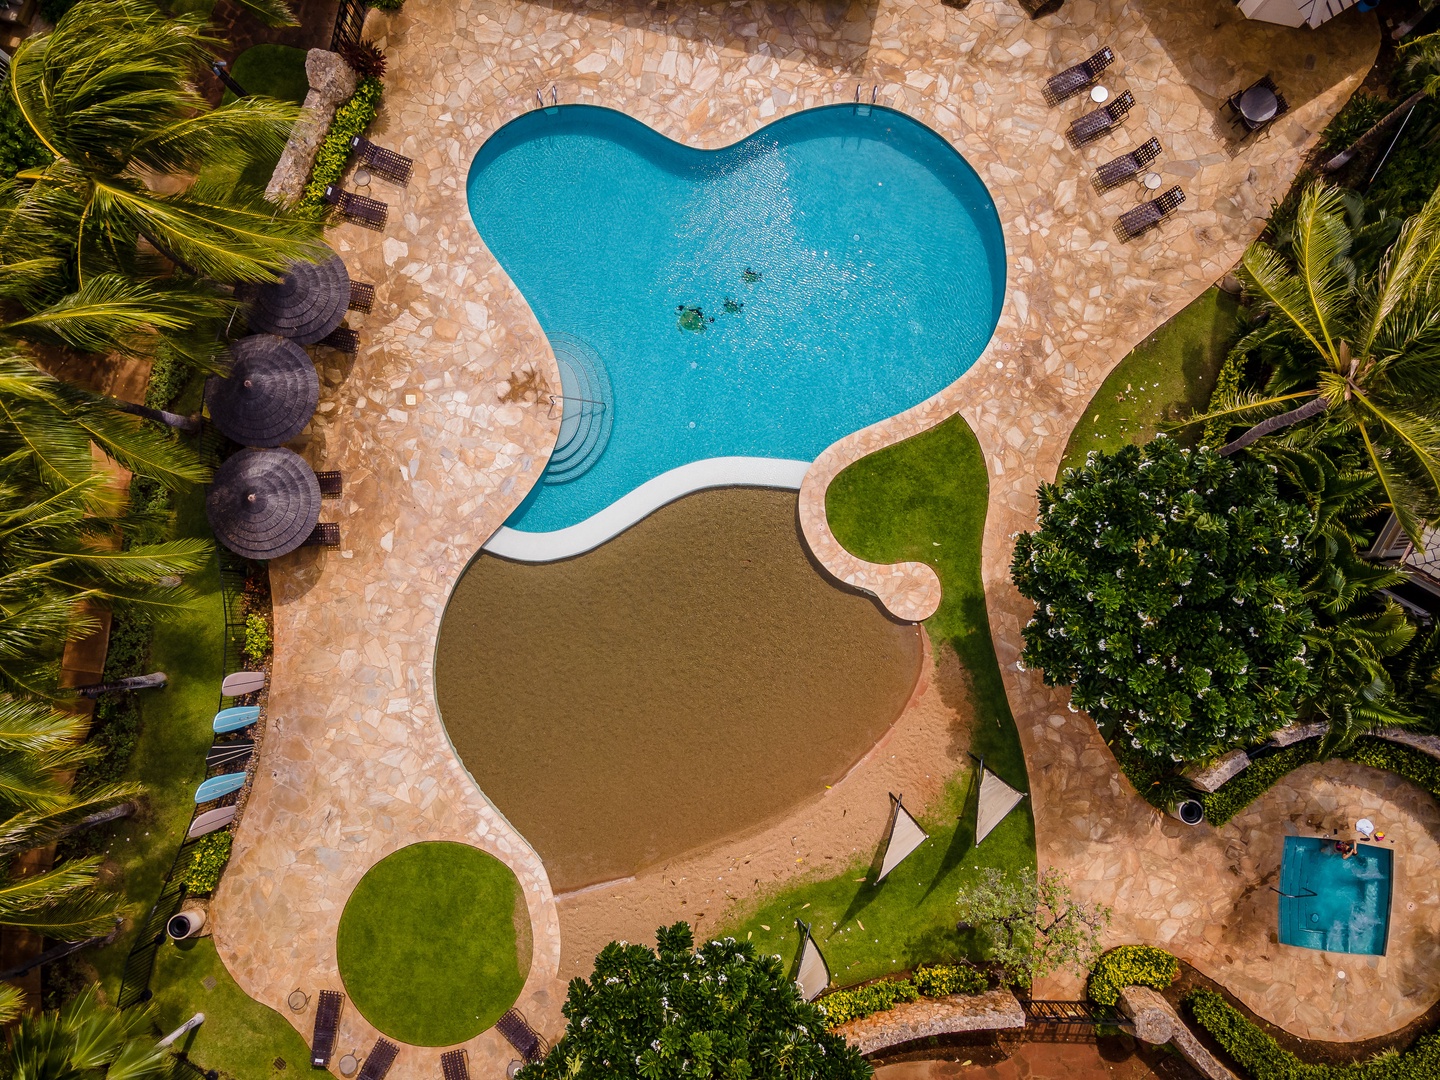 Kapolei Vacation Rentals, Coconut Plantation 1208-2 - An aerial view of another pool at the resort.